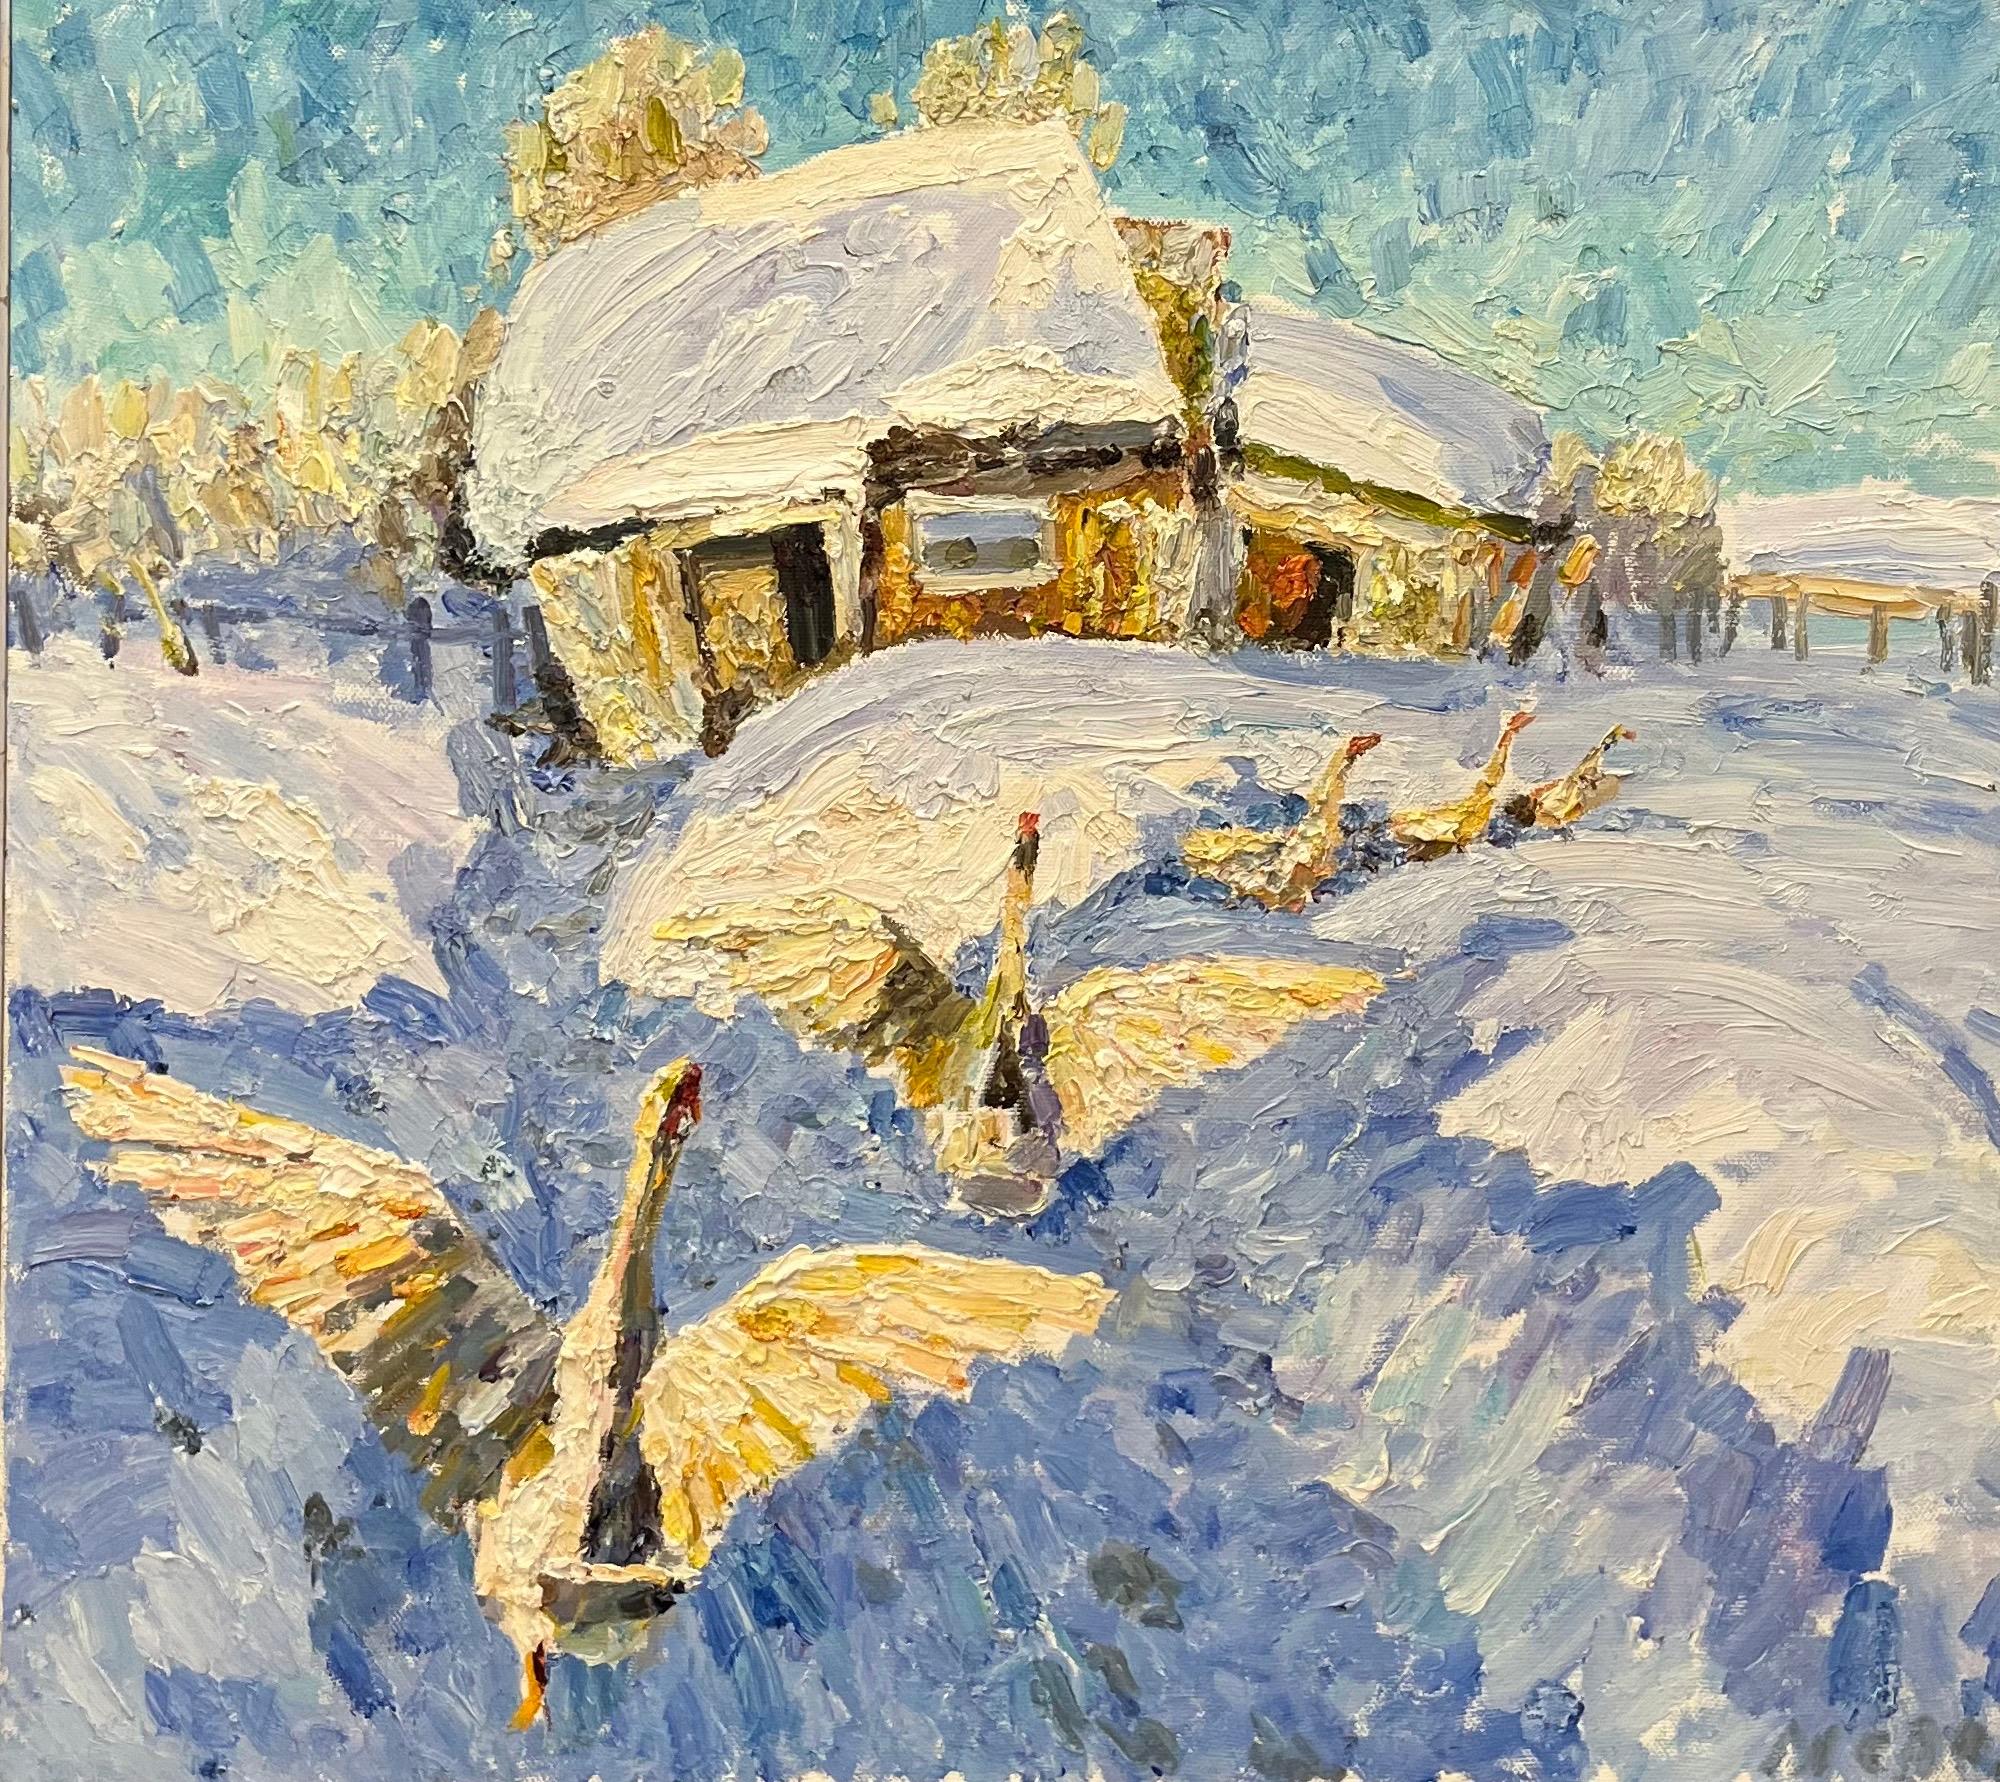 "Geese in the snow" oil cm. 100 x 80 